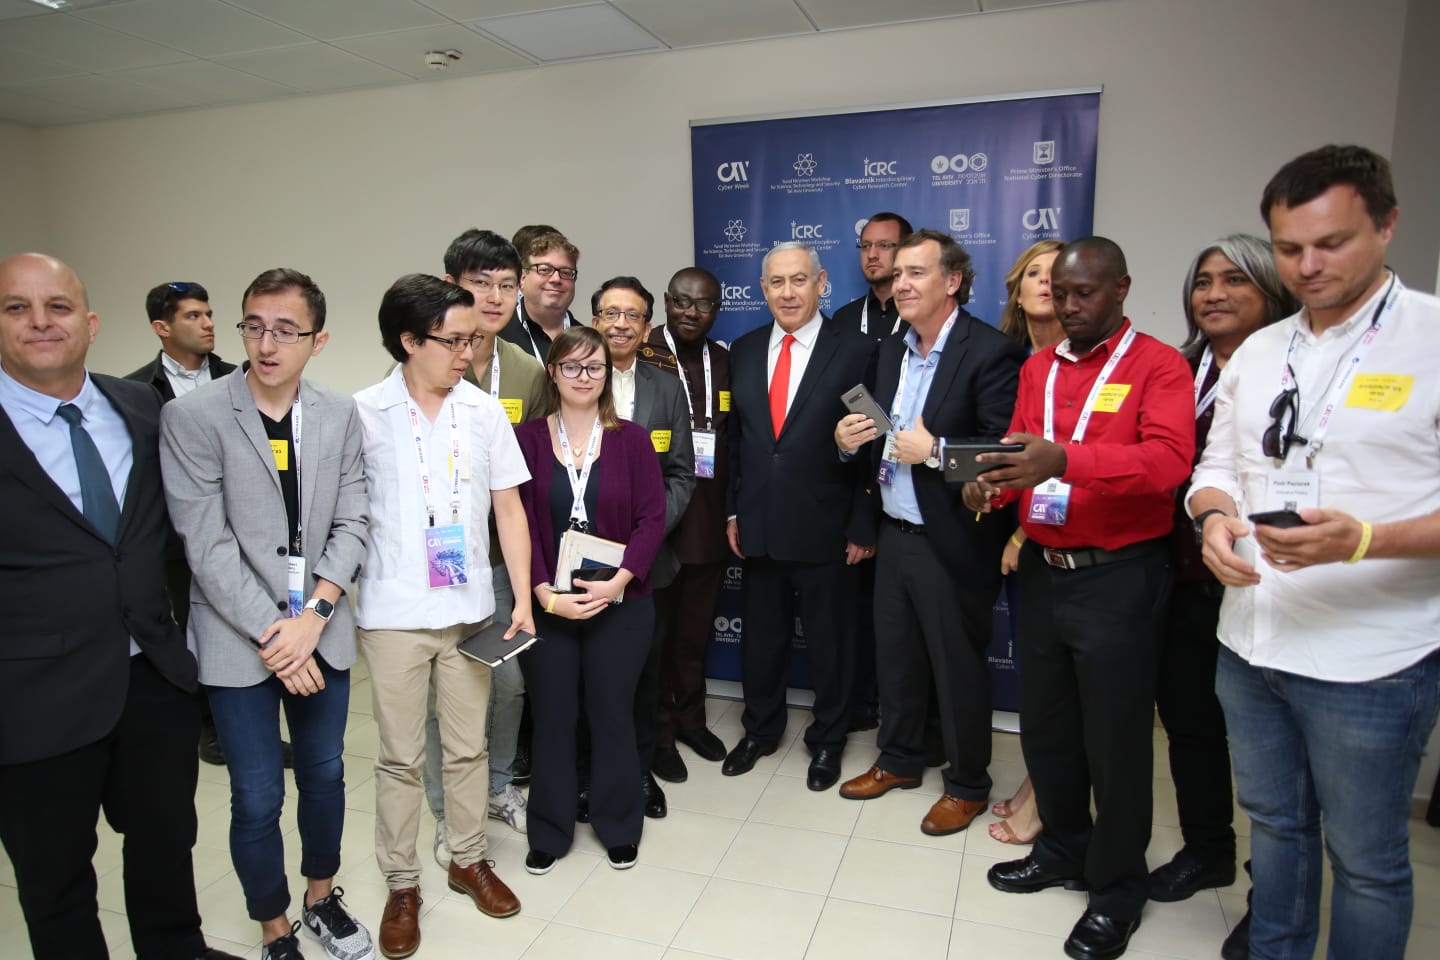 Mr Benjamin Netanyahu, Prime Minister of Israel (4th Right), with some members of the international press who were at of the conference. To his right is, Enoch Darfah Frimpong, Graphic Online’s representative at the conference.